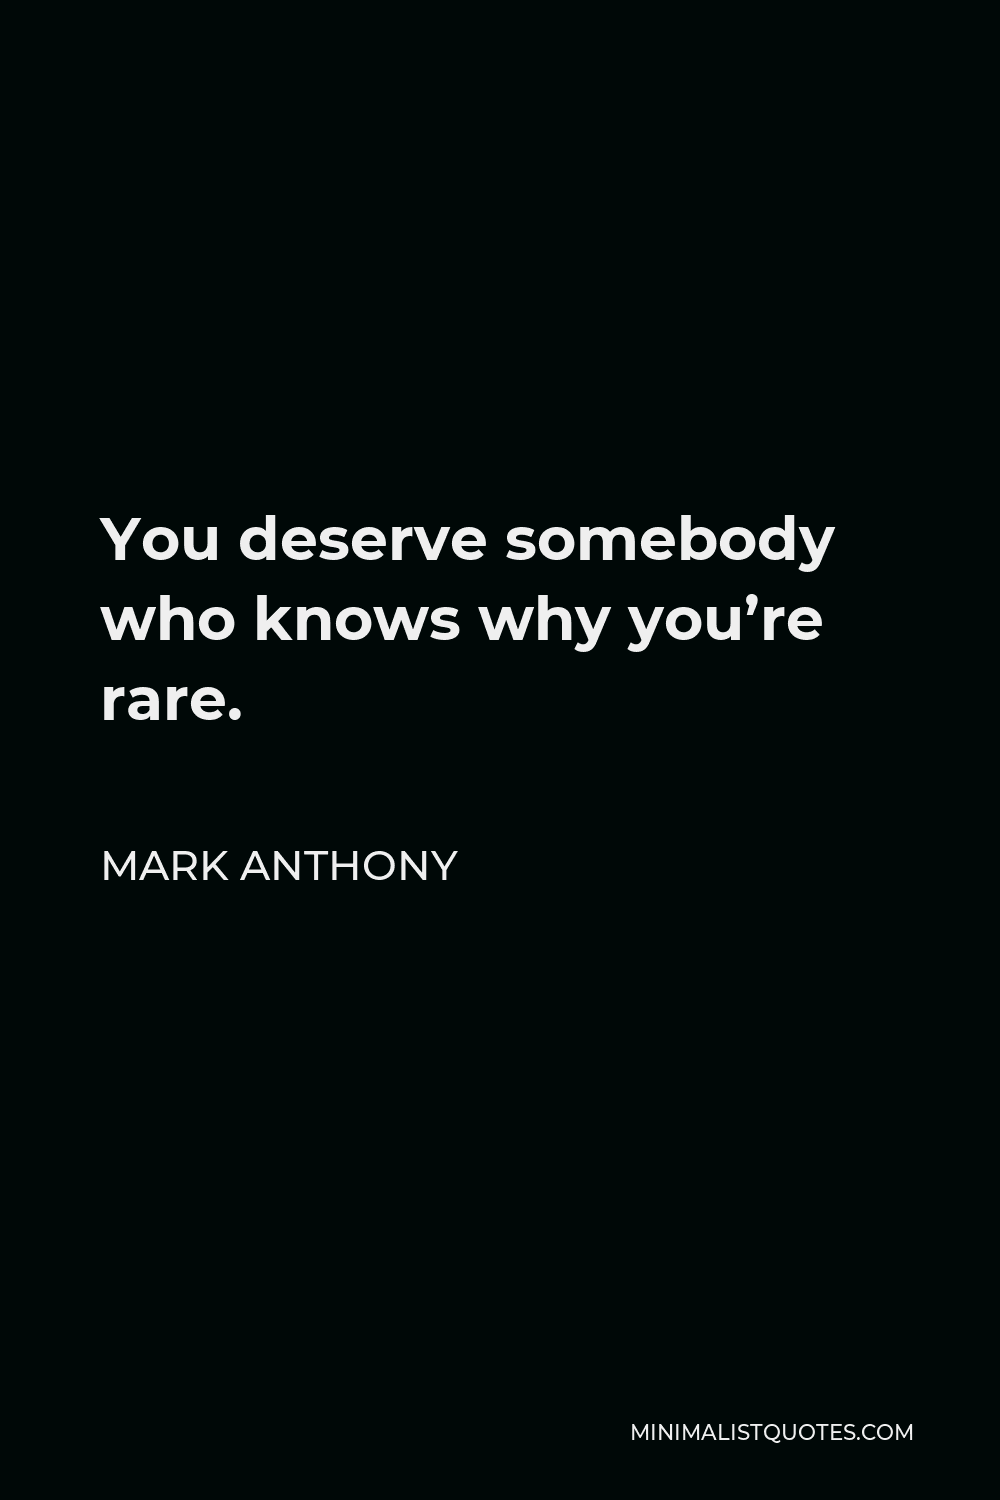 Mark Anthony Quote - You deserve somebody who knows why you’re rare.